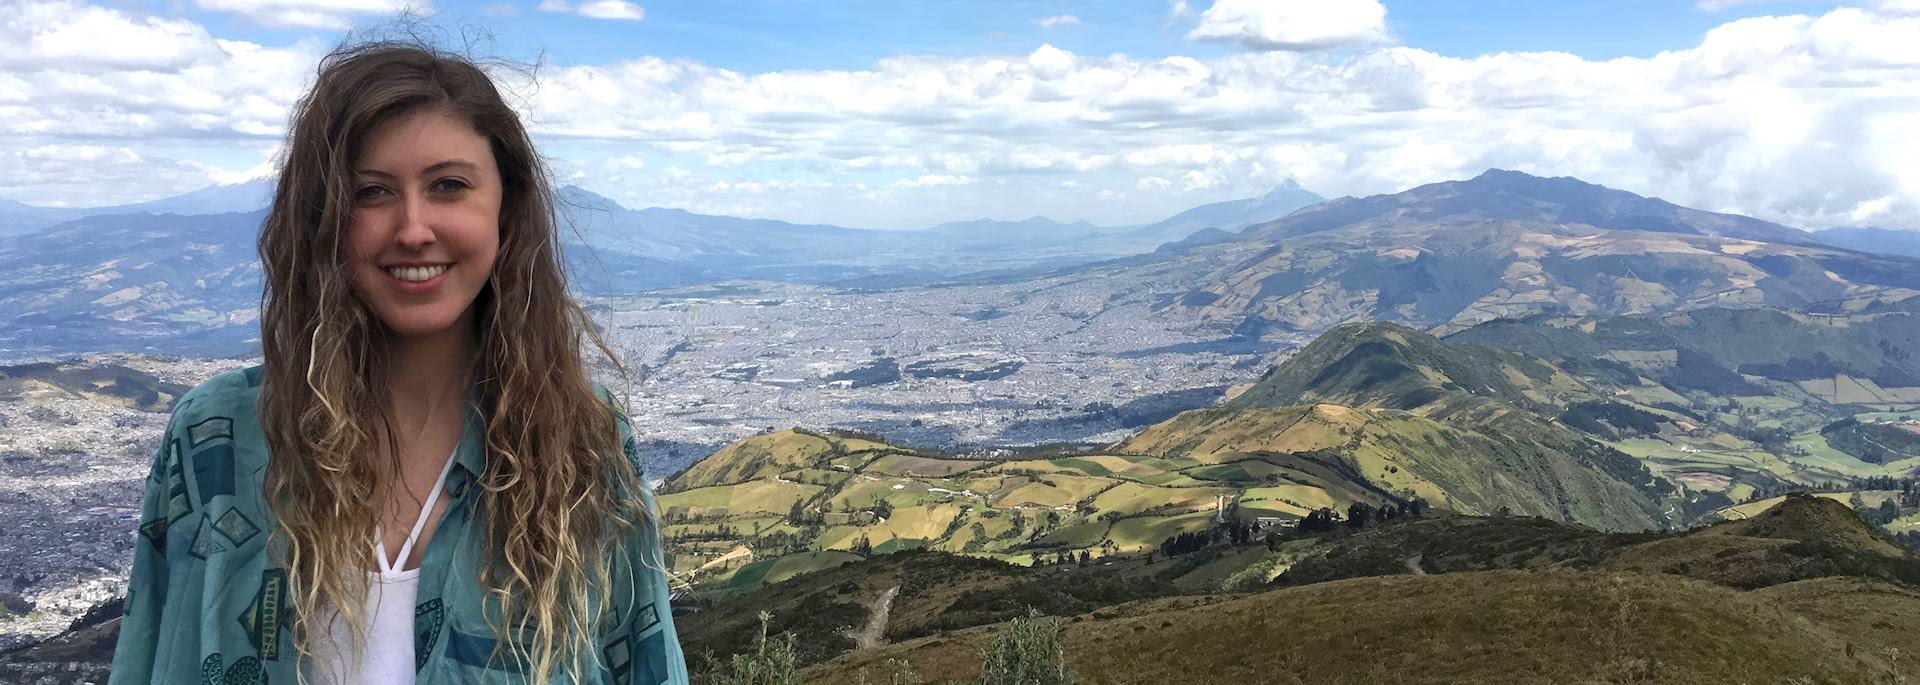 Lauren on the outskirts of Quito, Ecuador